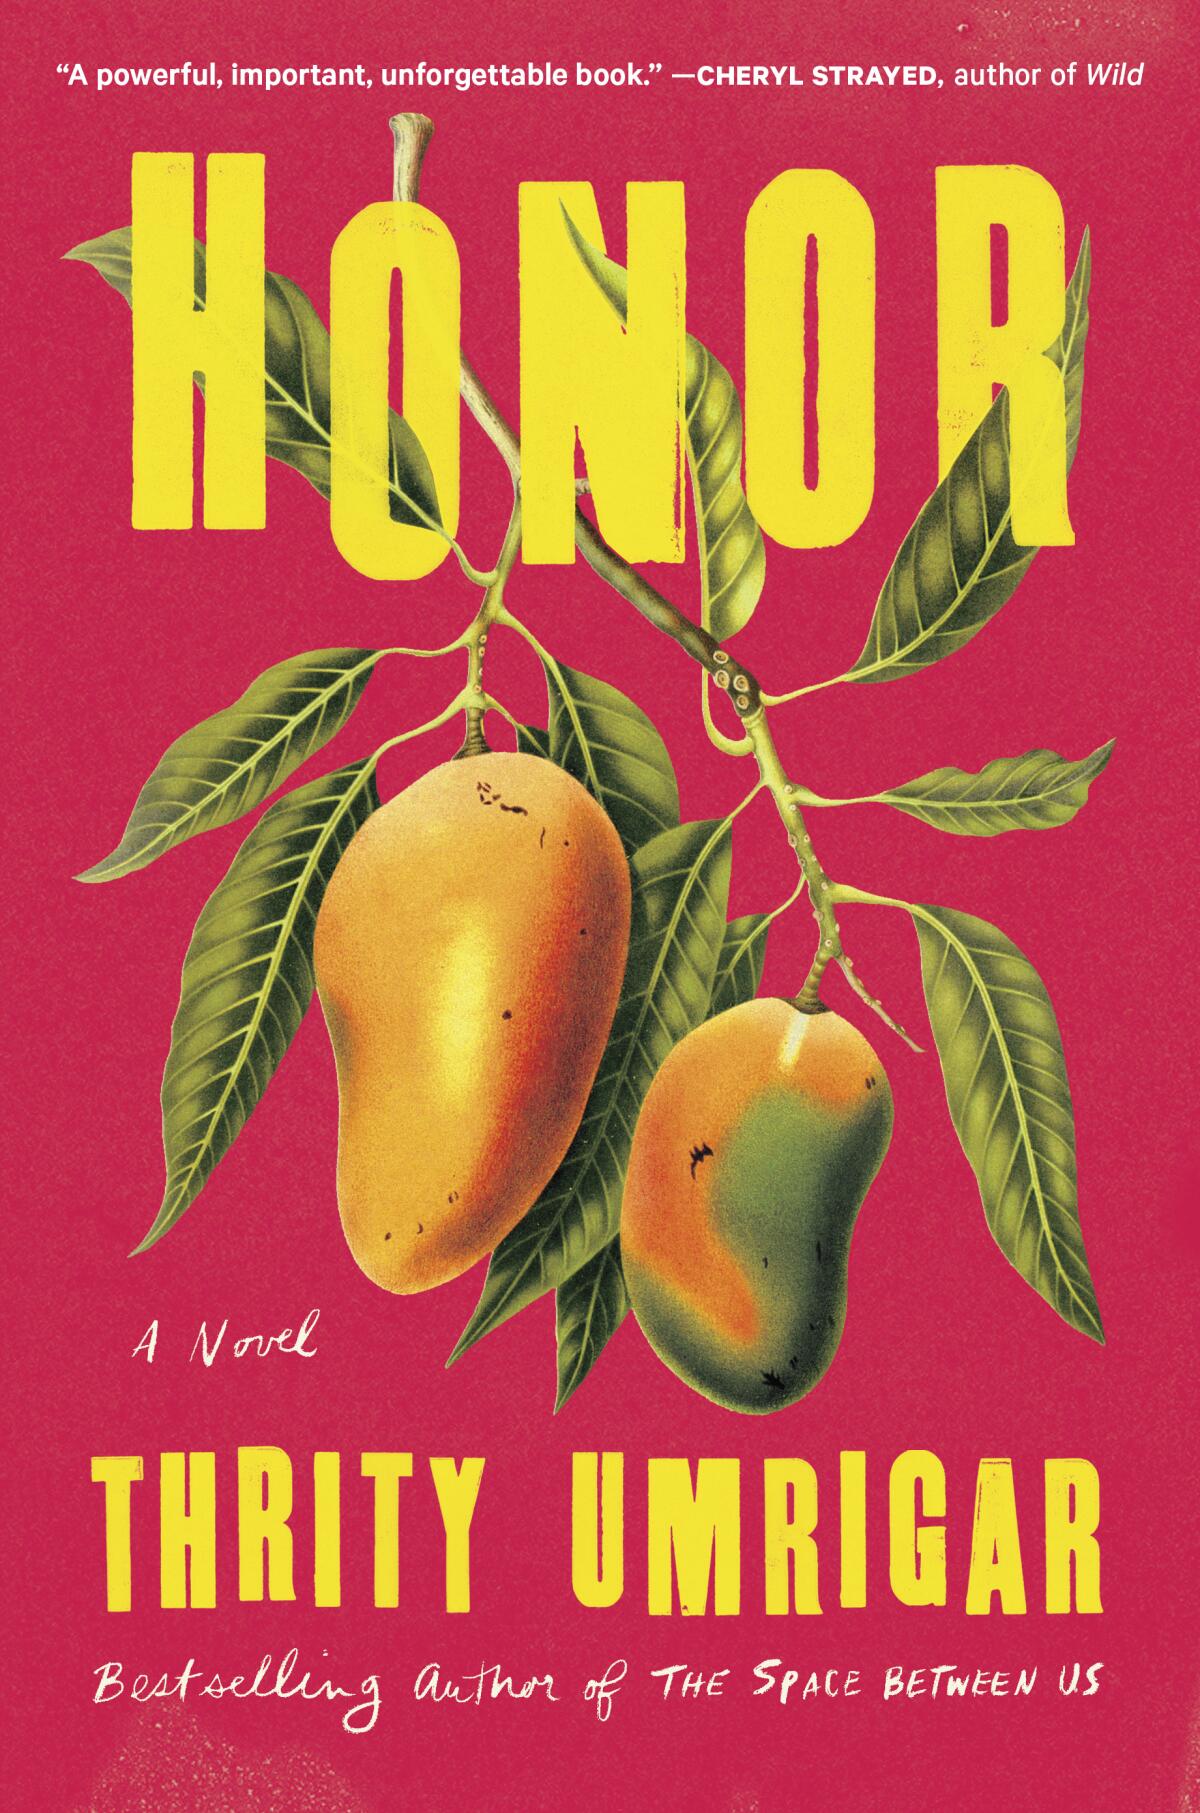 "Honor," by Thrity Umrigar